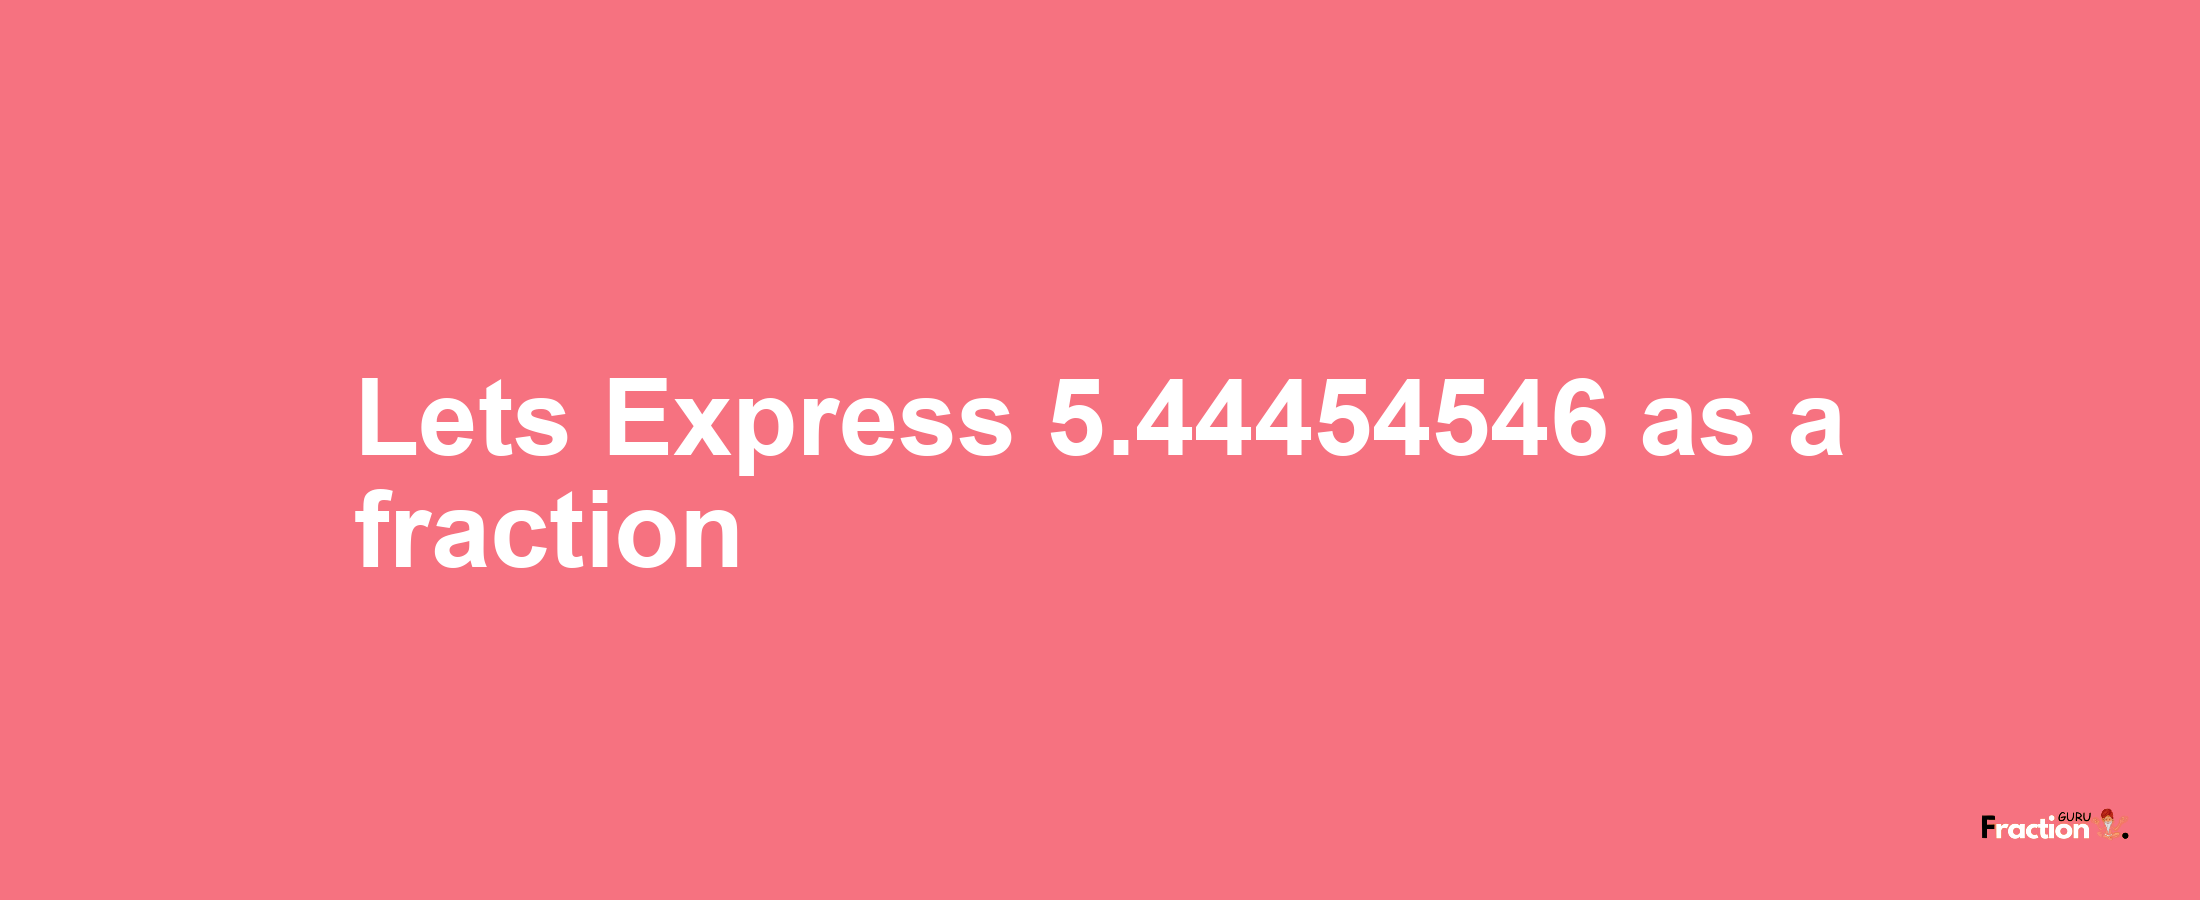 Lets Express 5.44454546 as afraction